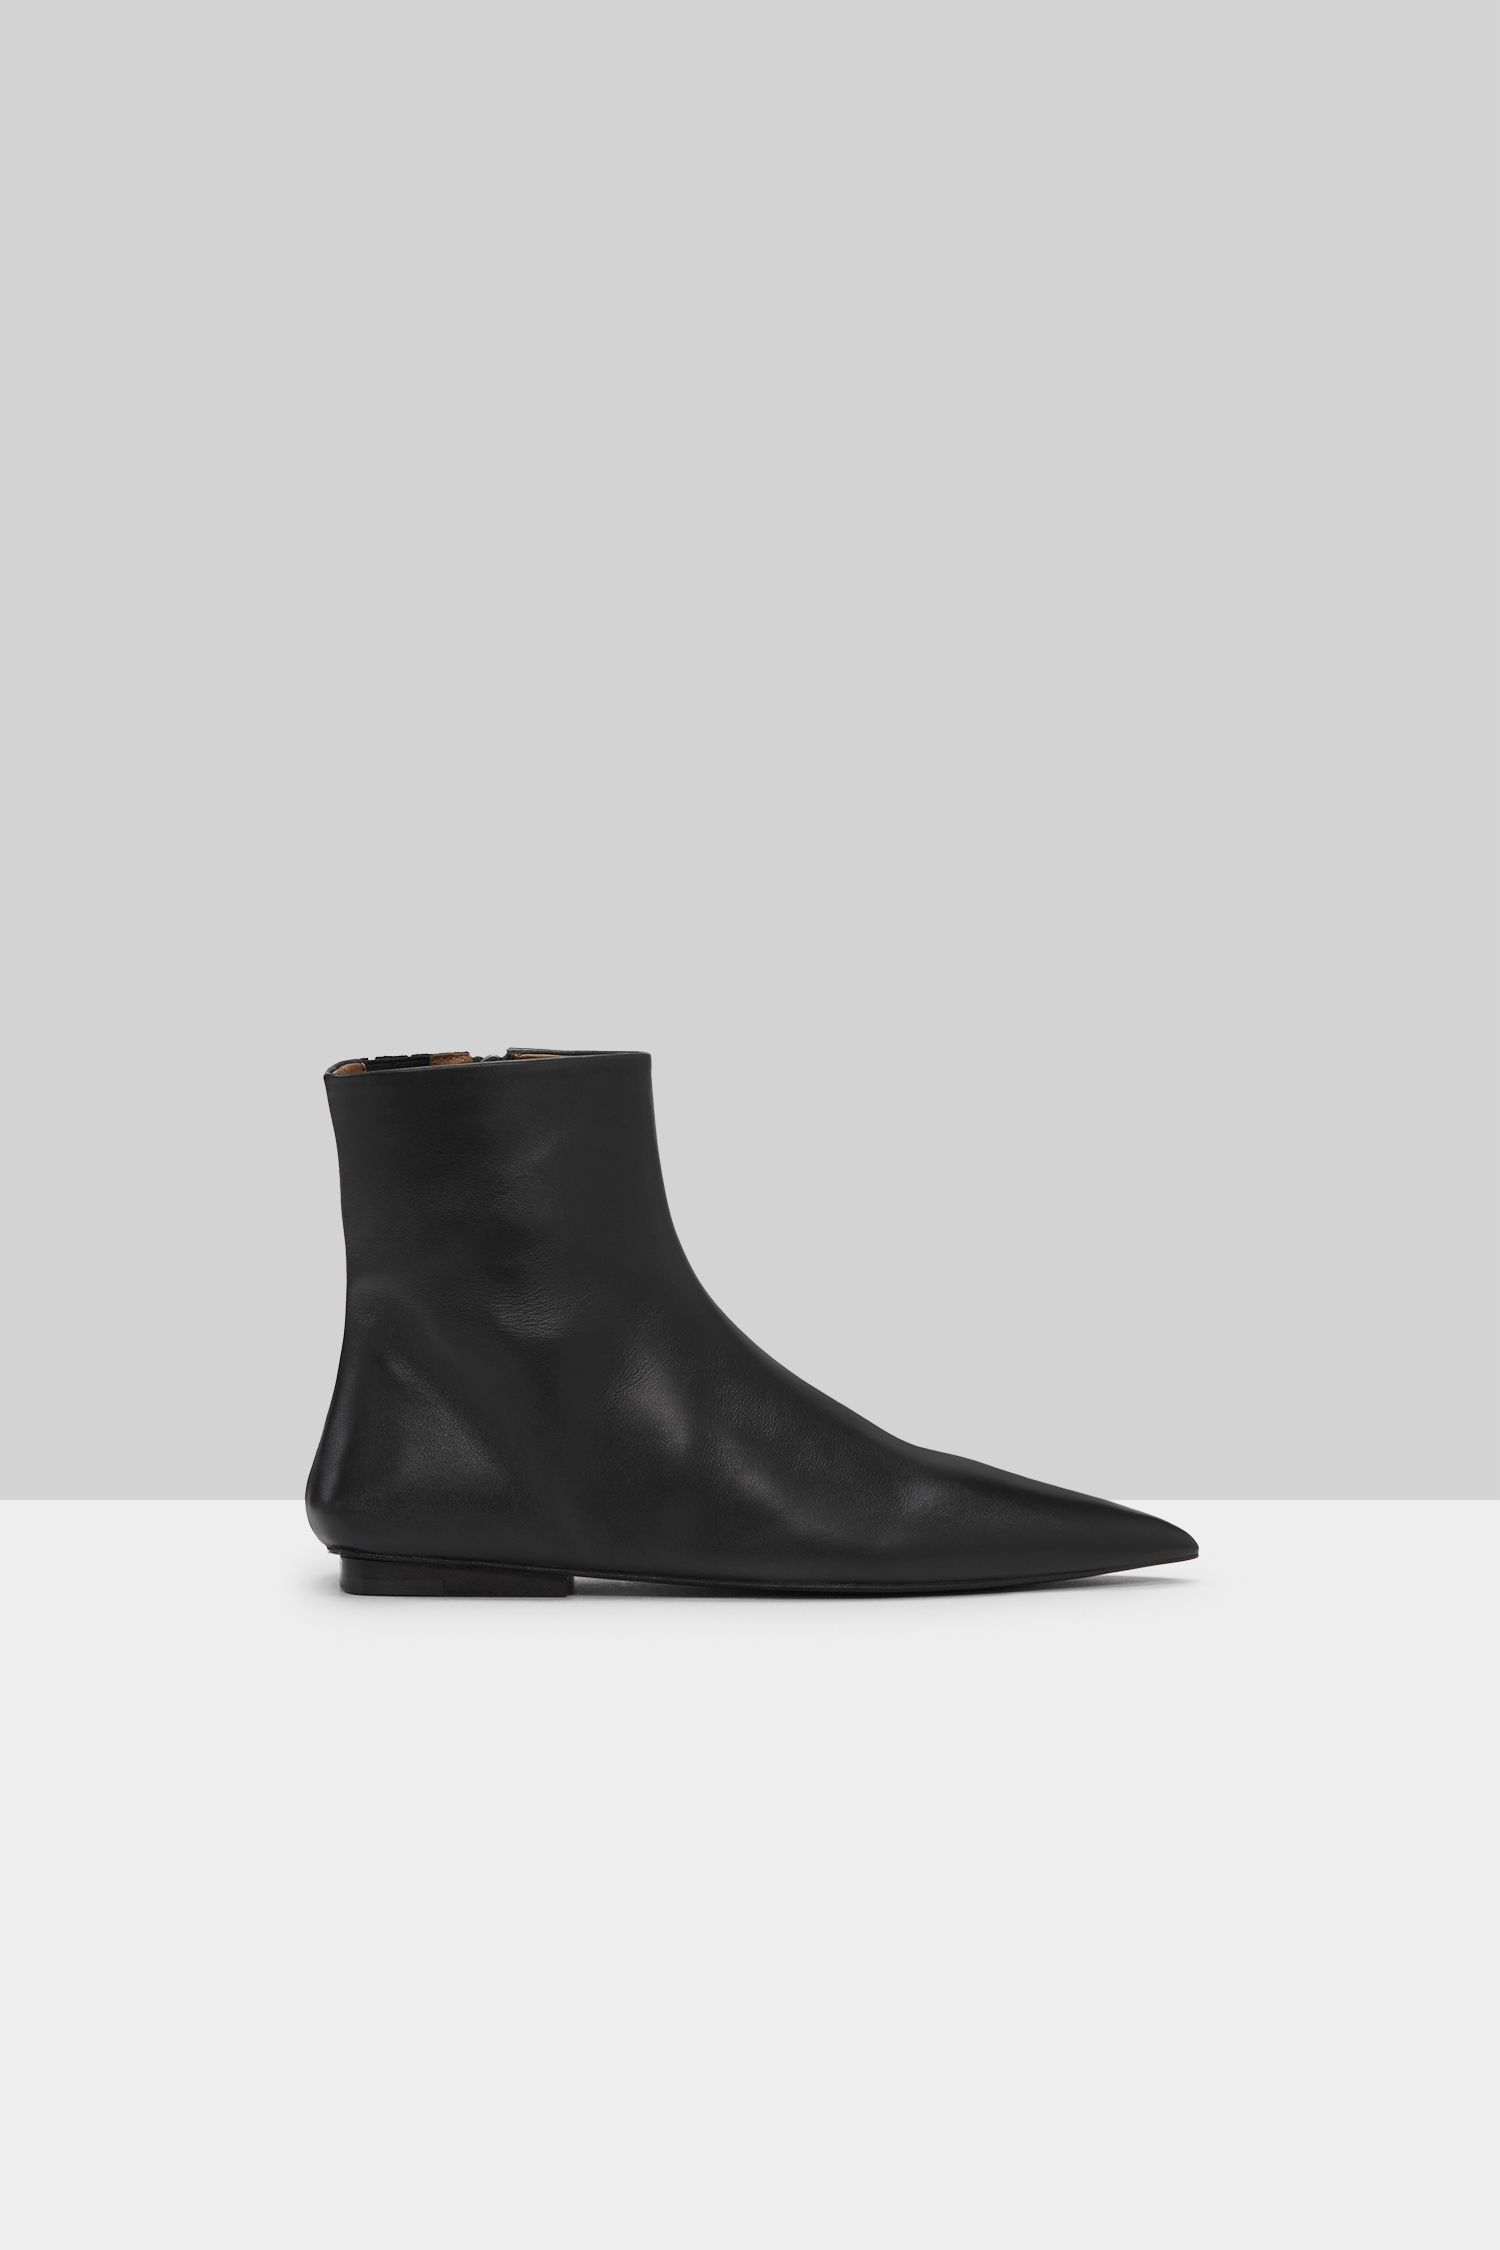 Ago Ankle Boot Black